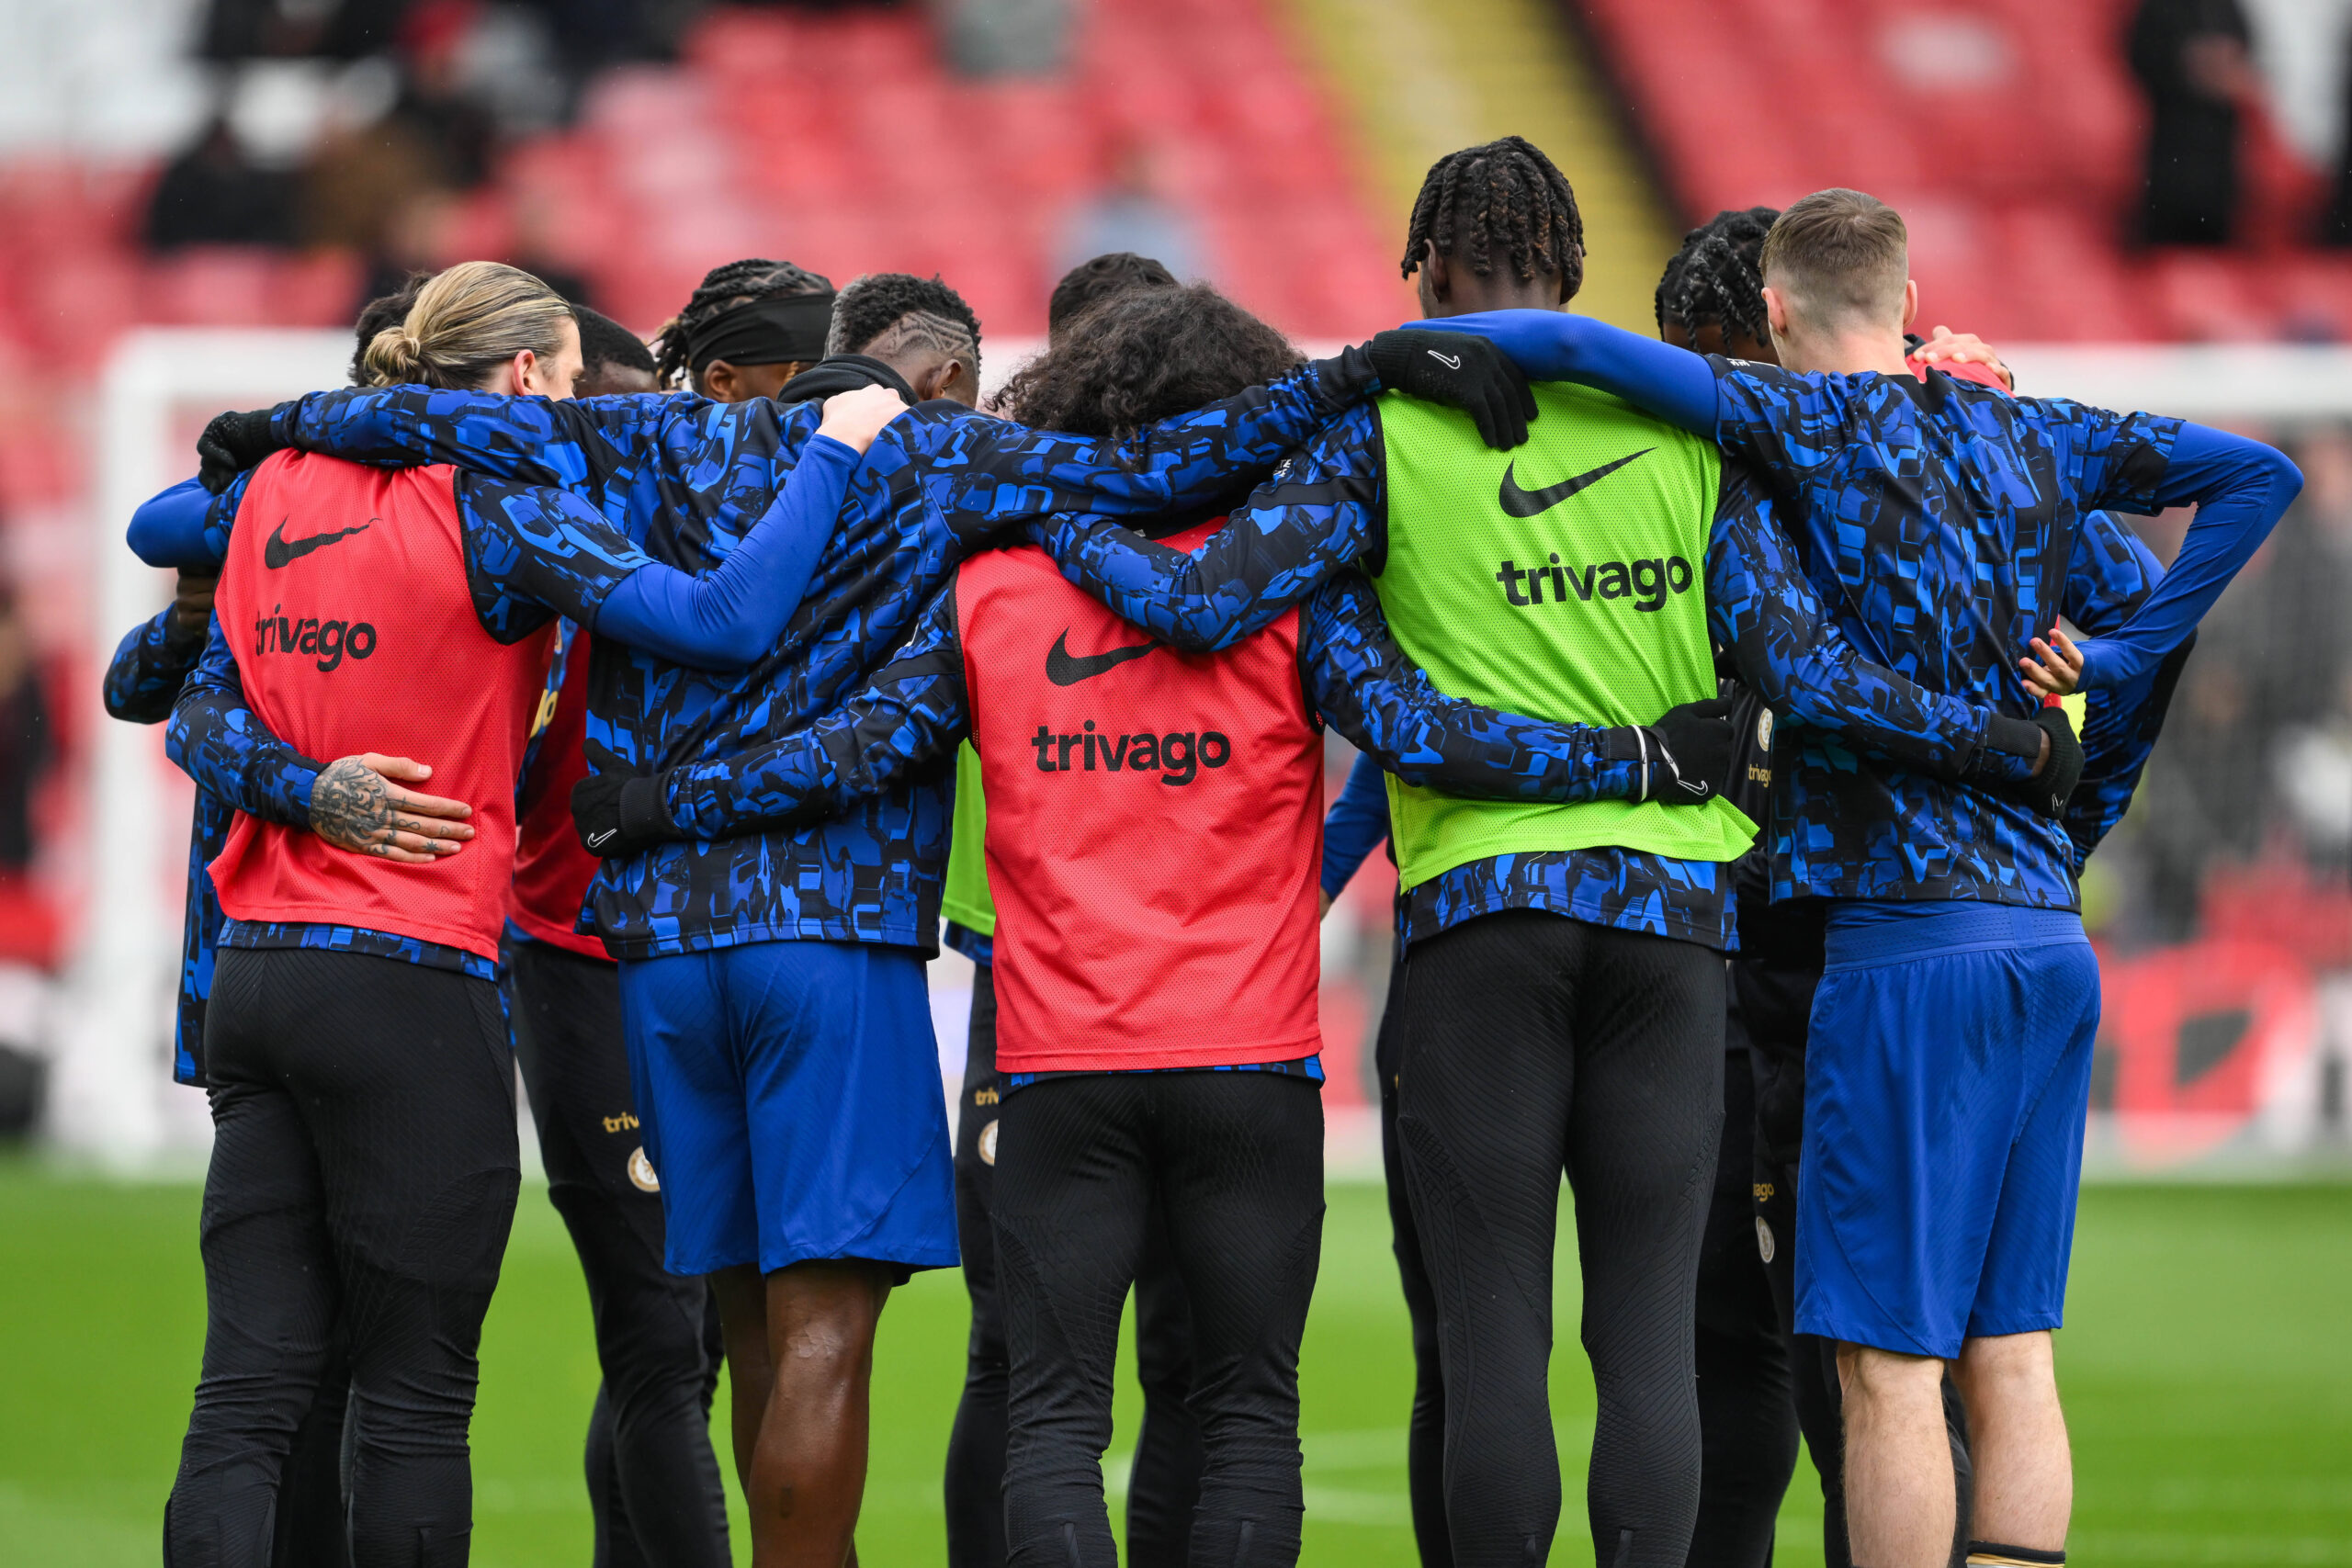 Chelsea players huddle in training gear for pre-match talk